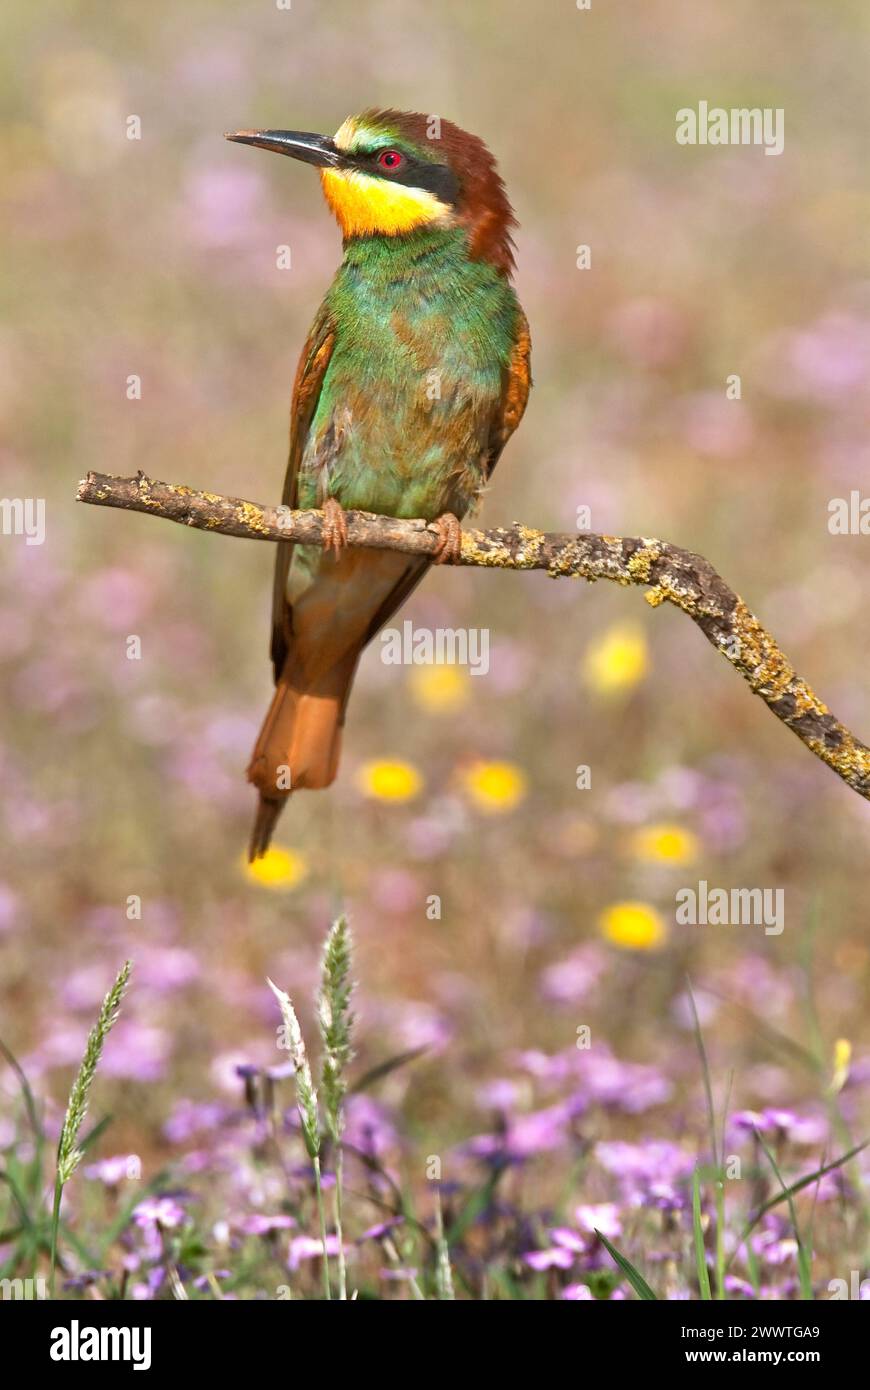 European Bee-eater (Merops apiaster) perched on branch. Seville, Andalucia, Spain. Stock Photo